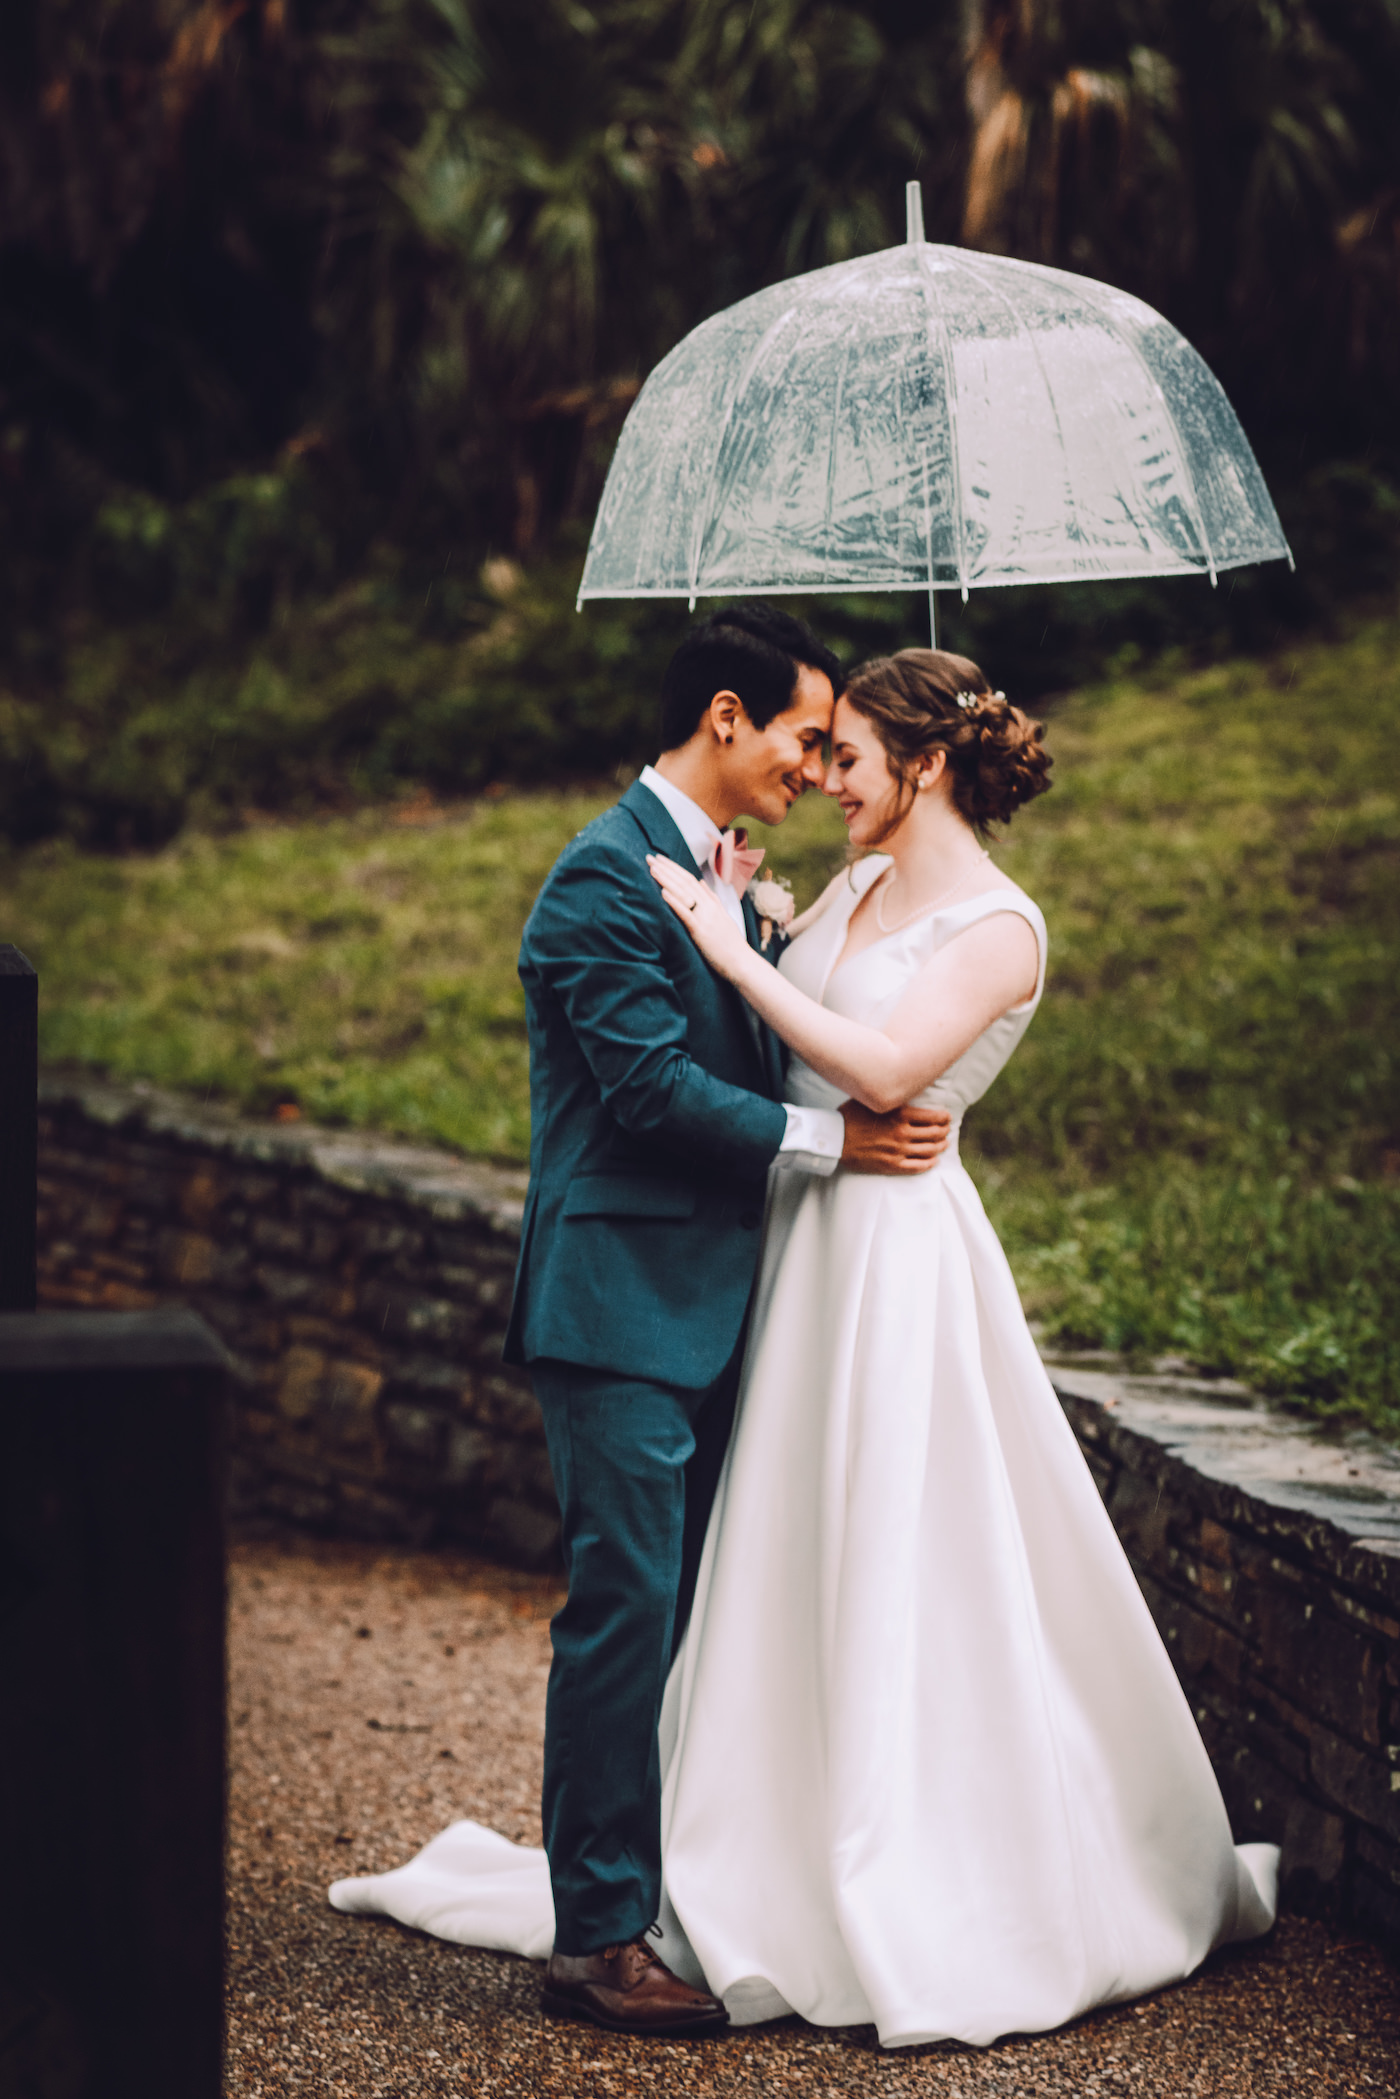 Bride and Groom Rainy Wedding Day Portrait with Clear Umbrellas | Stella York Satin V Neck Simple Classic Low Back Bridal Gown A Line Ballgown | Navy Blue Suit Groom Suit with Grey Vest and Blush Pink Bow Tie